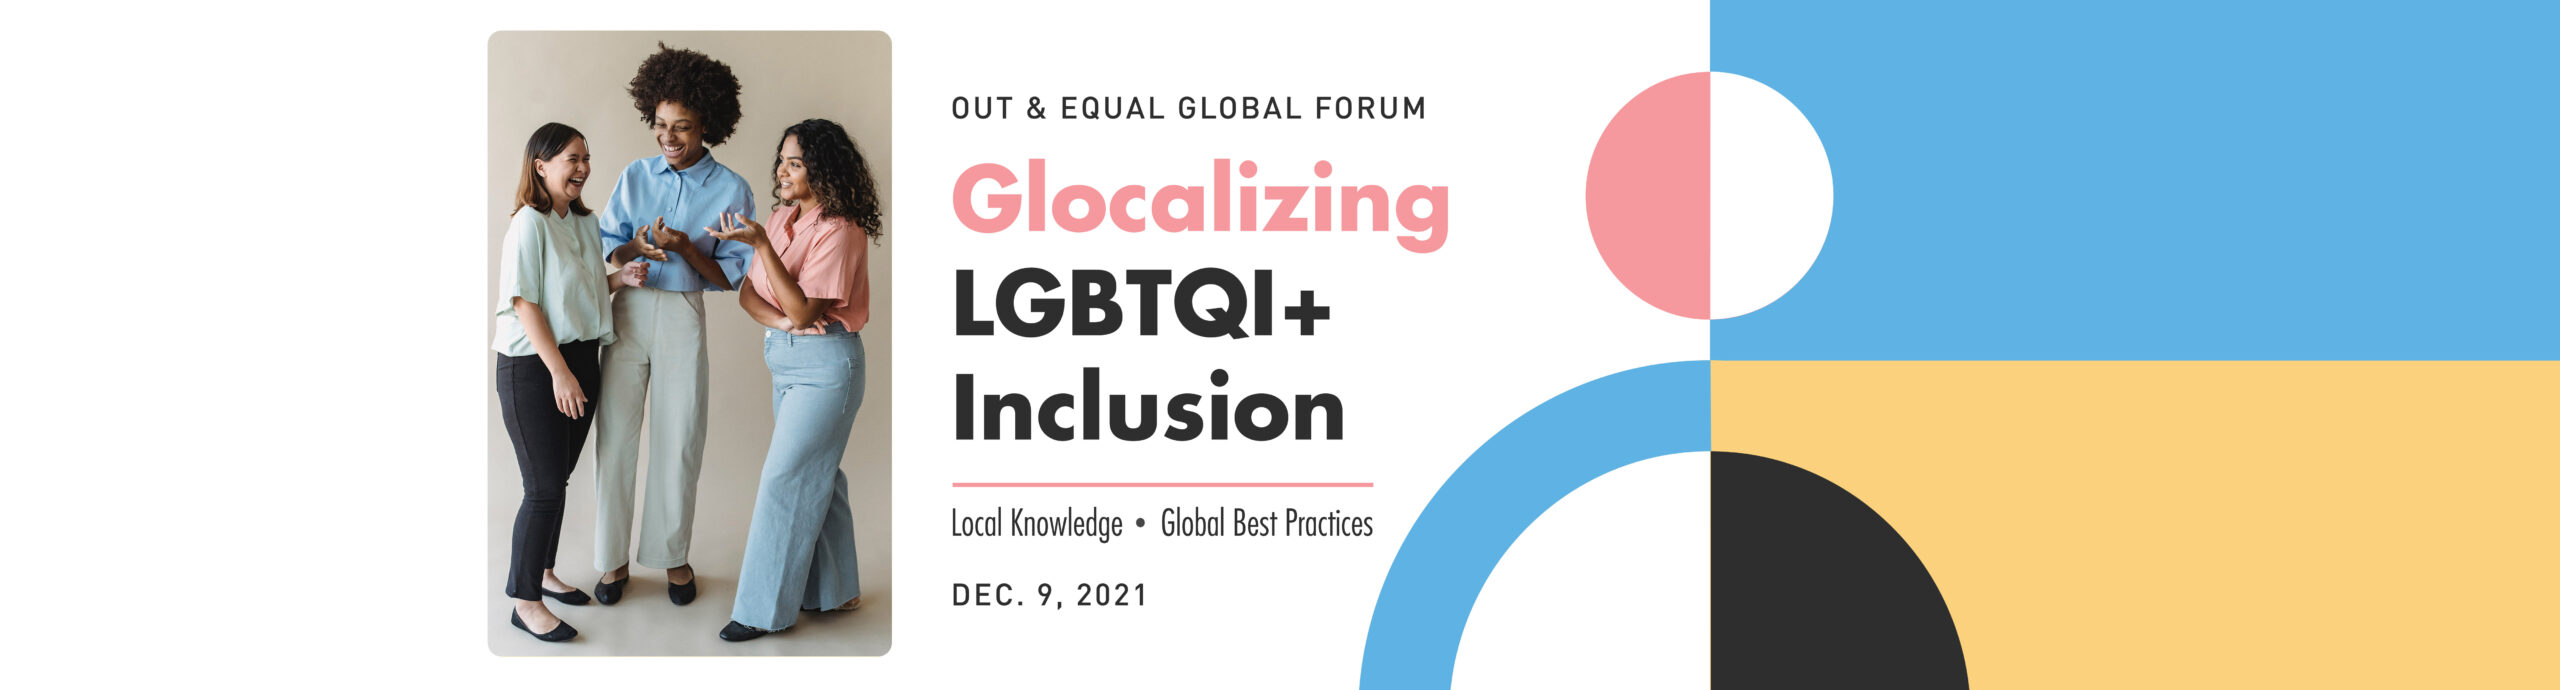 Glocalizing LGBTQI+ Inclusion. Local Knowledge, Global Best Practices. December 9, 2021